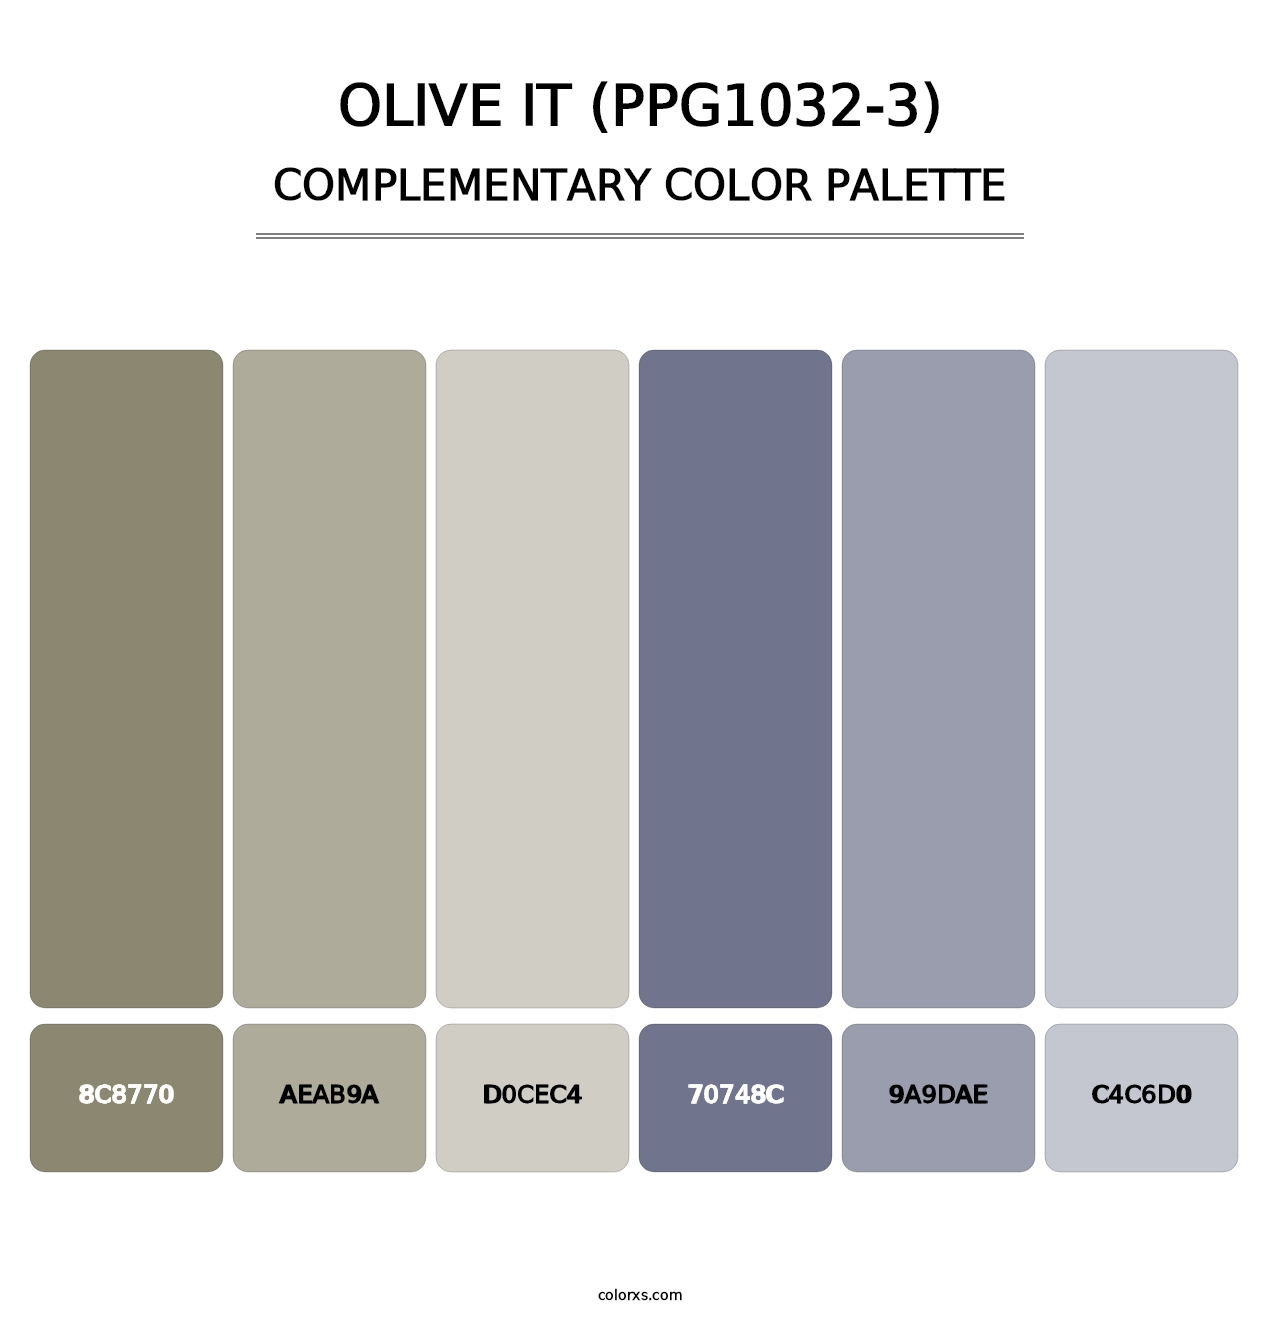 Olive It (PPG1032-3) - Complementary Color Palette